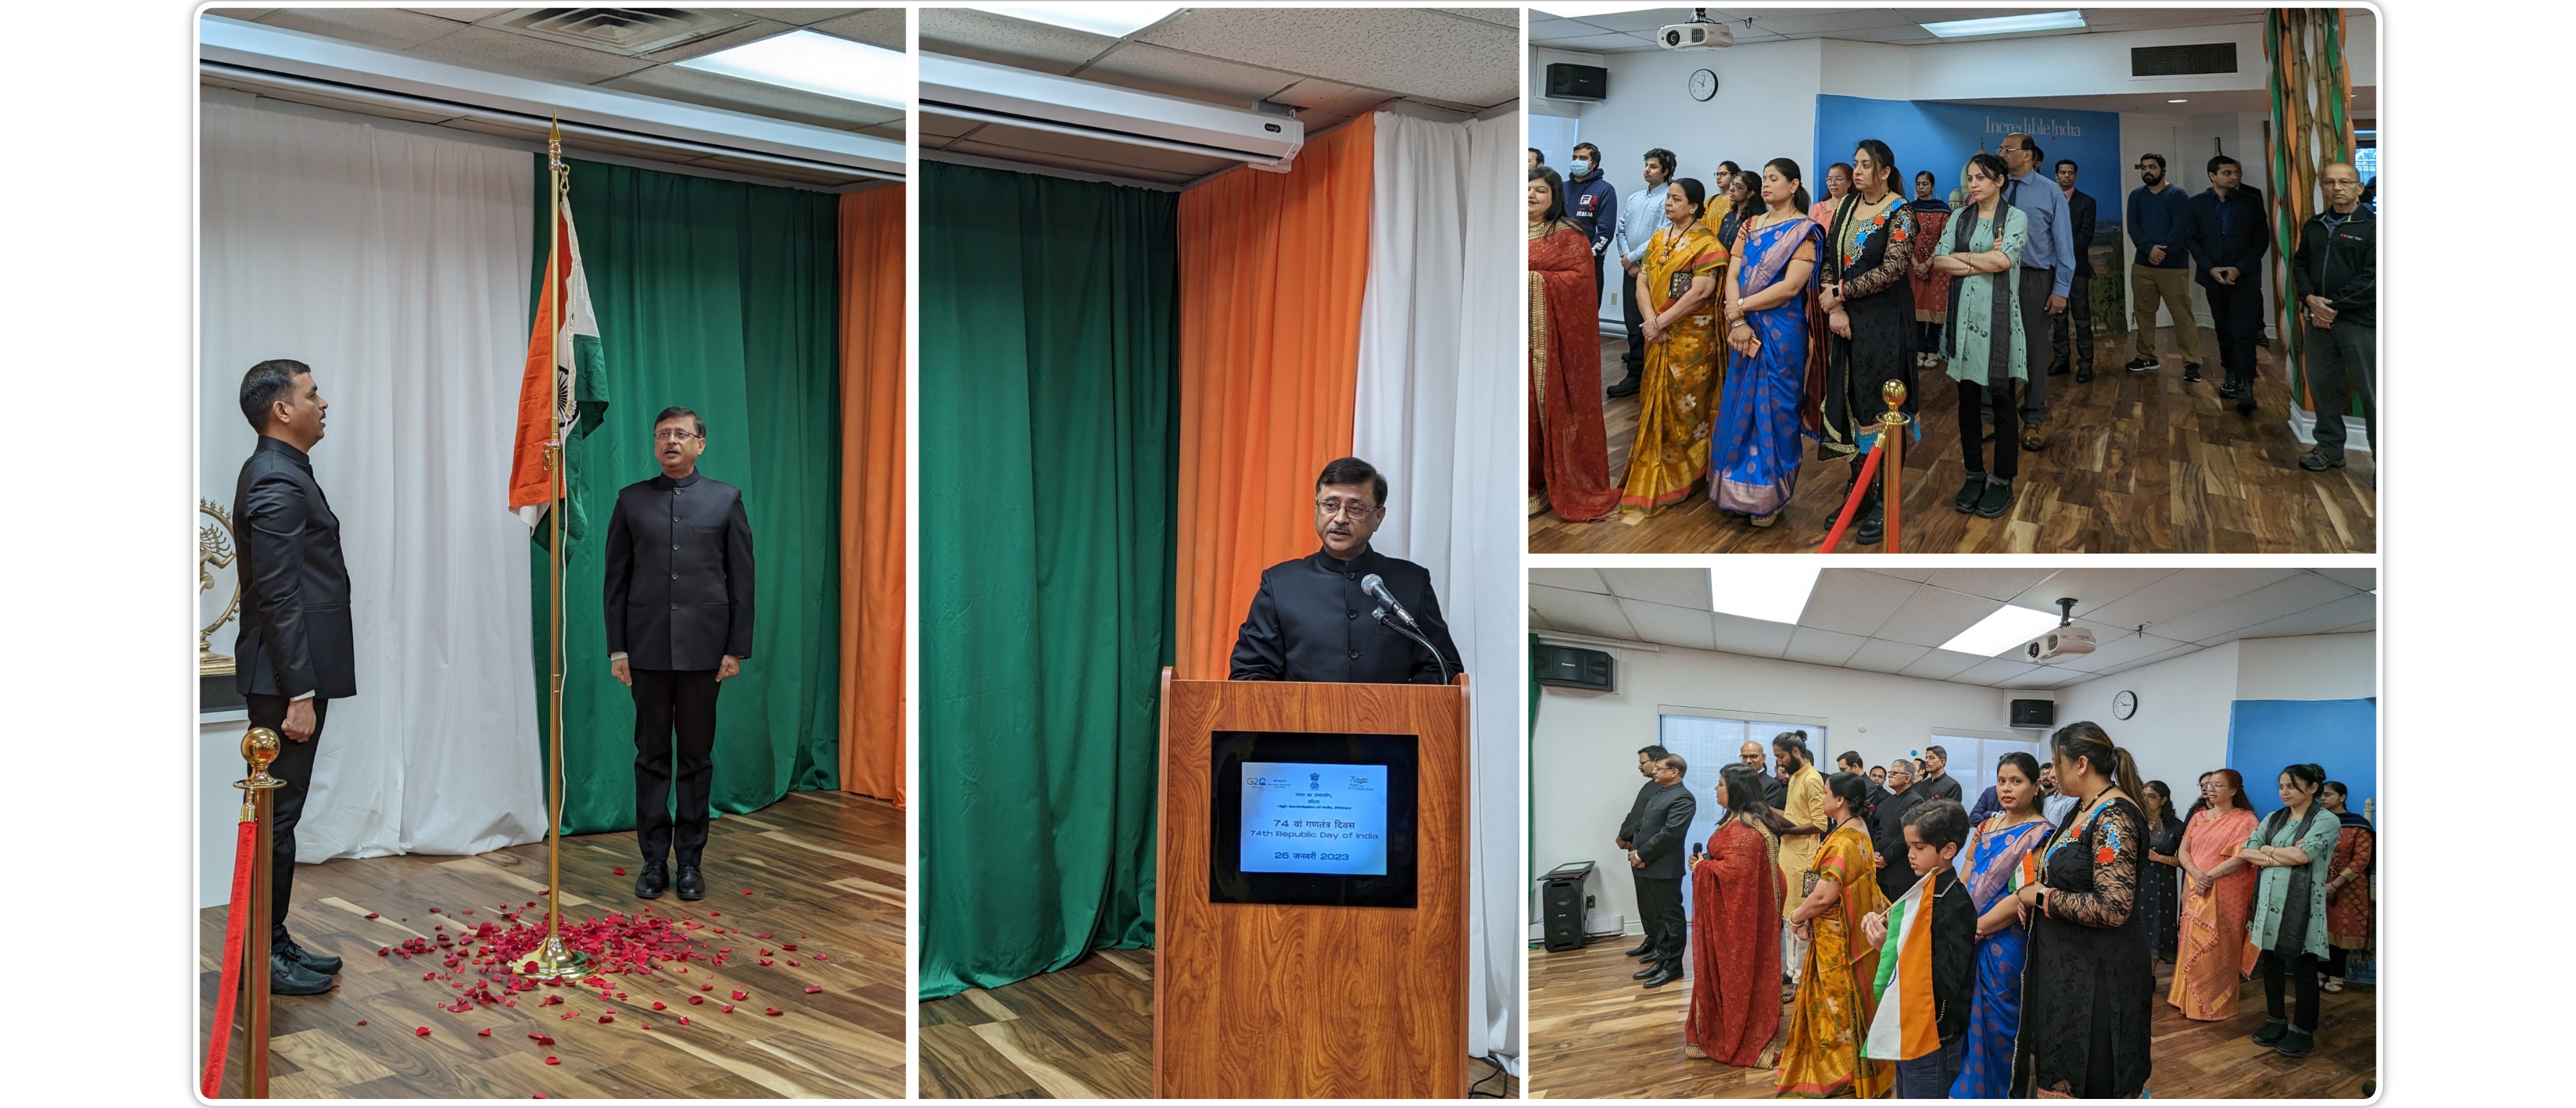  74th Republic Day celebrations at HCI Ottawa. High Commissioner Shri Sanjay Kumar Verma unfurled the National flag and read out the President's address to the nation on the eve of R. Day 2023. 26 Jan 2023